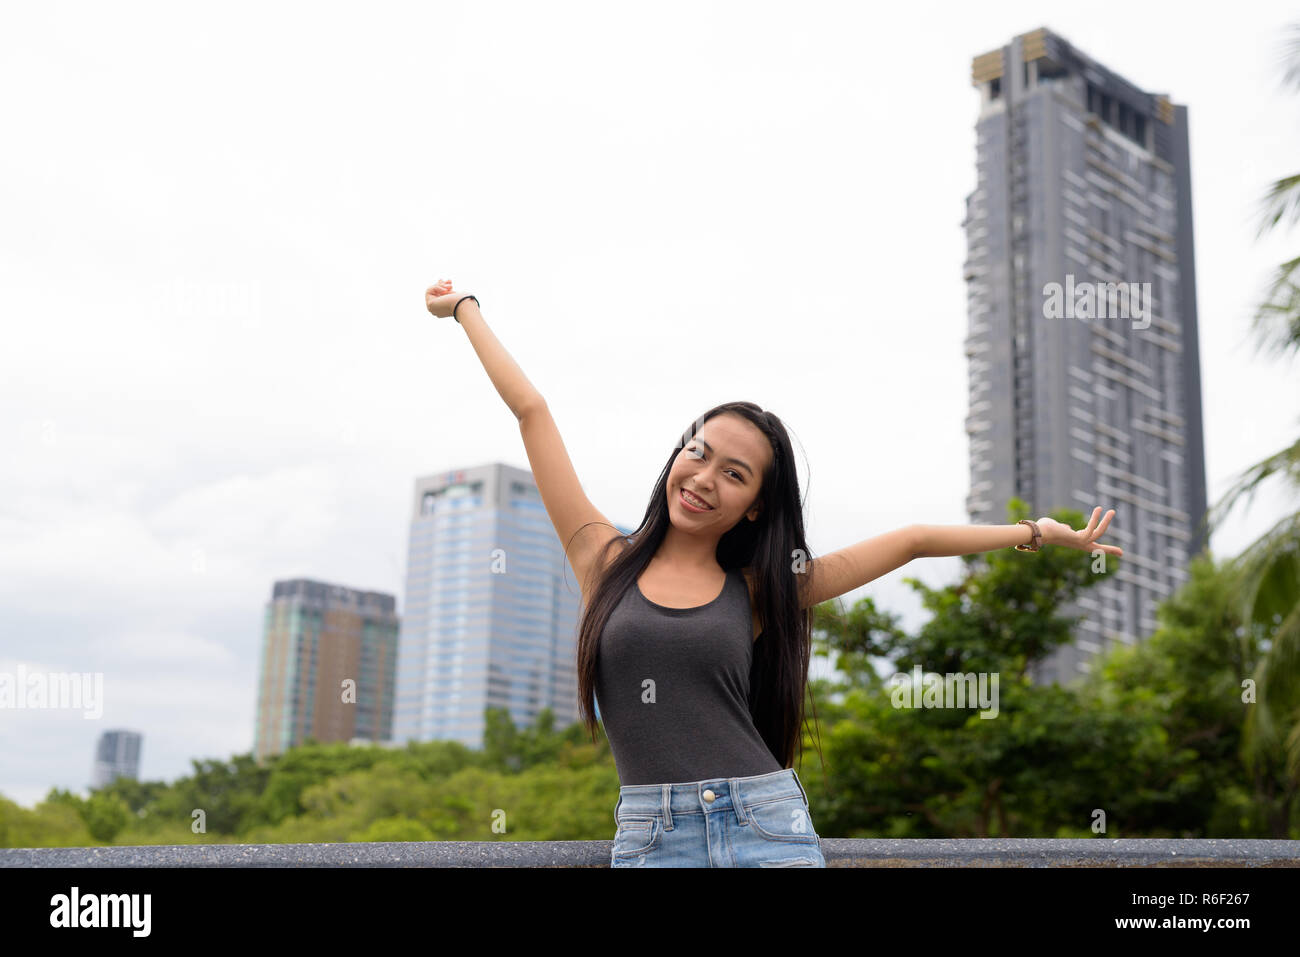 Young beautiful Asian woman relaxing at the park with arms raised Stock Photo